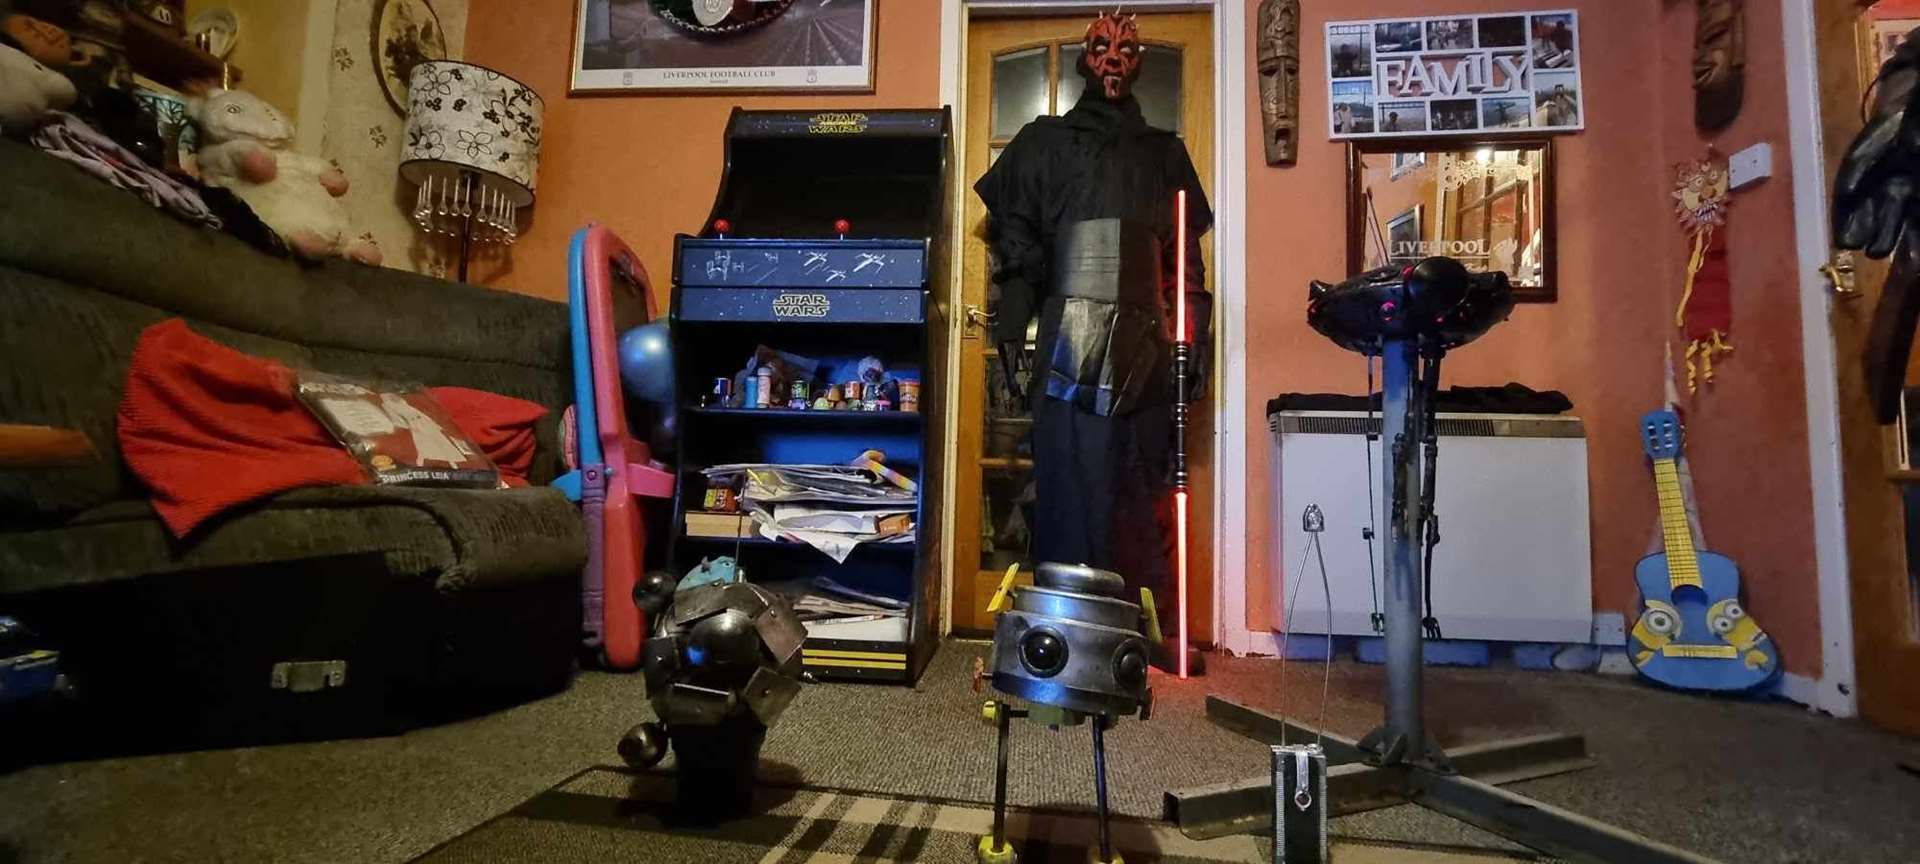 Mark’s new additions (from left) probe droid, RJ and id10. His new Darth Maul is lurking behind them.